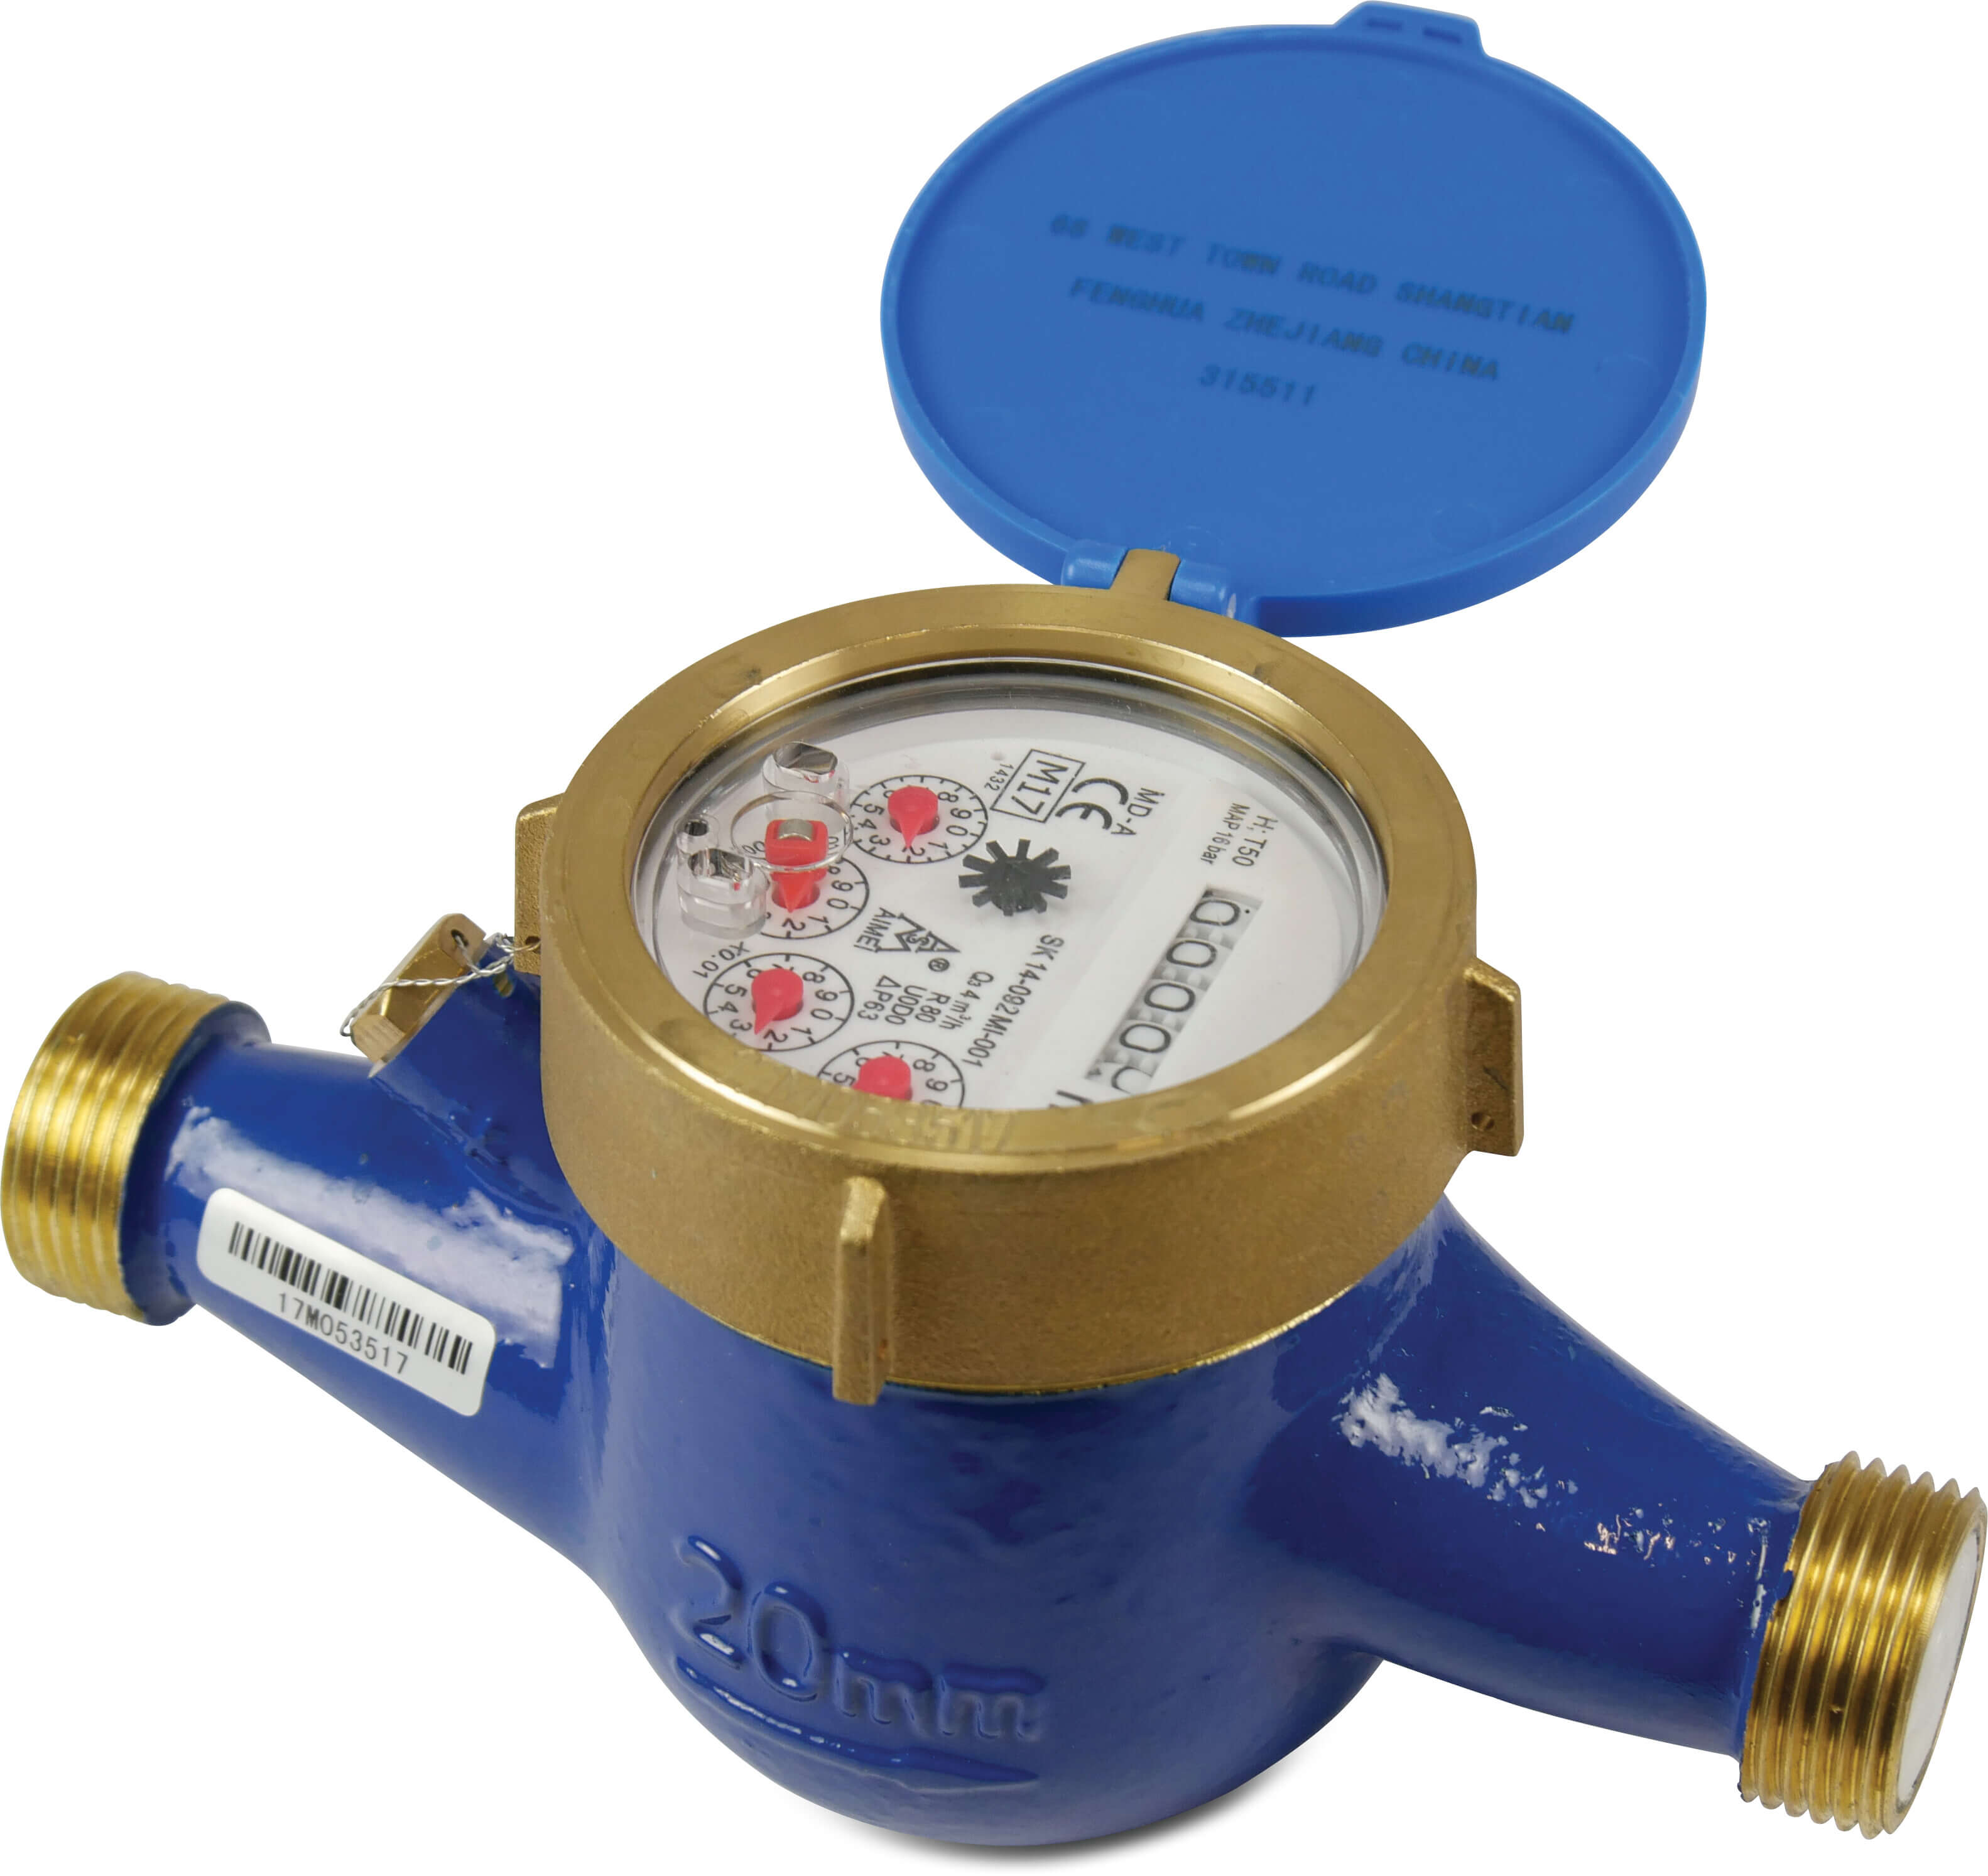 Profec Water meter dry brass 1" male thread 16bar type TL multi jet horizontal with pulse option L1